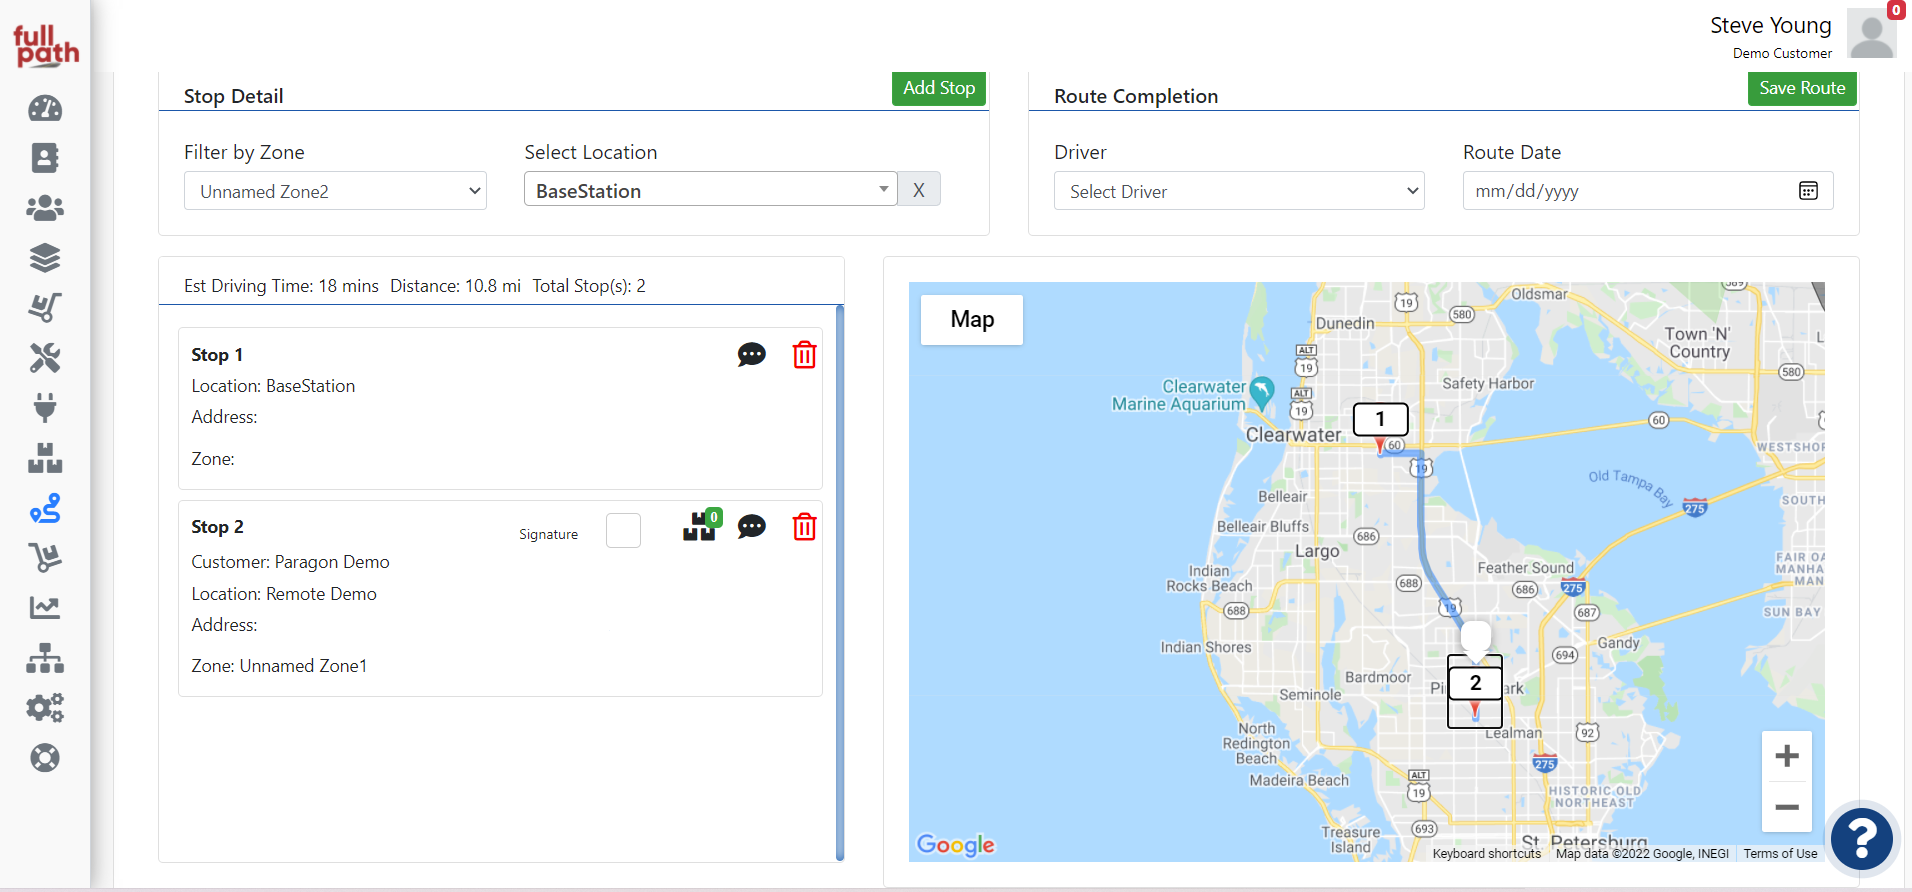 FullPath - Create and manage routes with the Google Maps integrated route builder. As you select the locations it builds the route instantly allowing you to make the most efficient route.